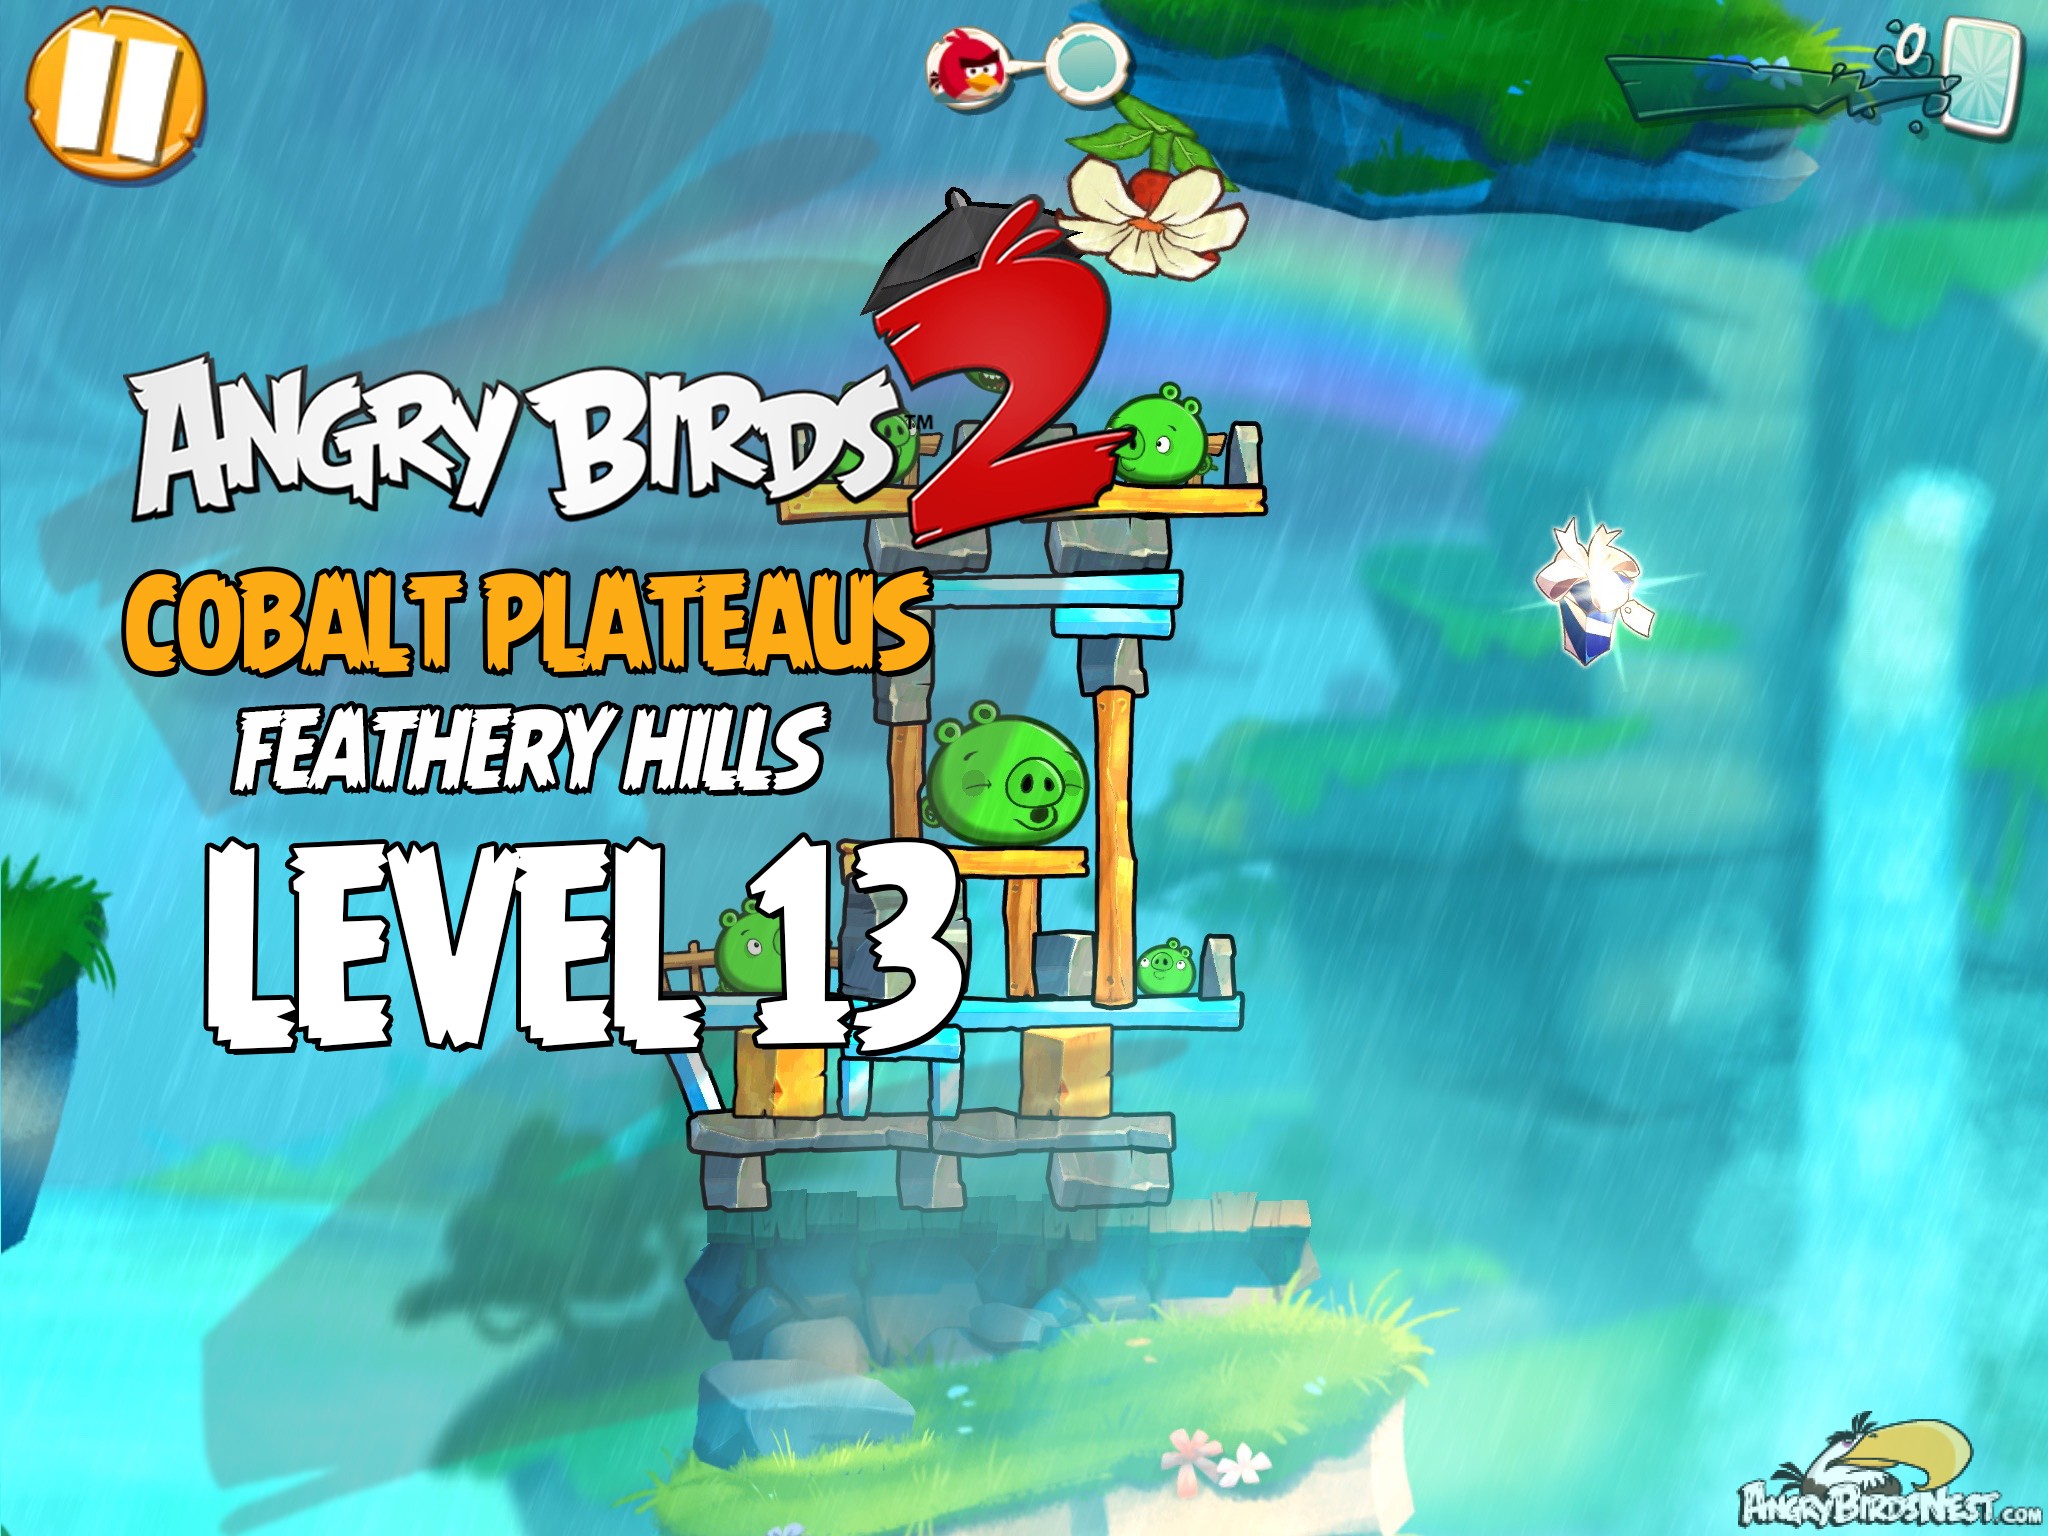 Angry Birds 2 Cobalt Plateaus Feathery Hills Level 13